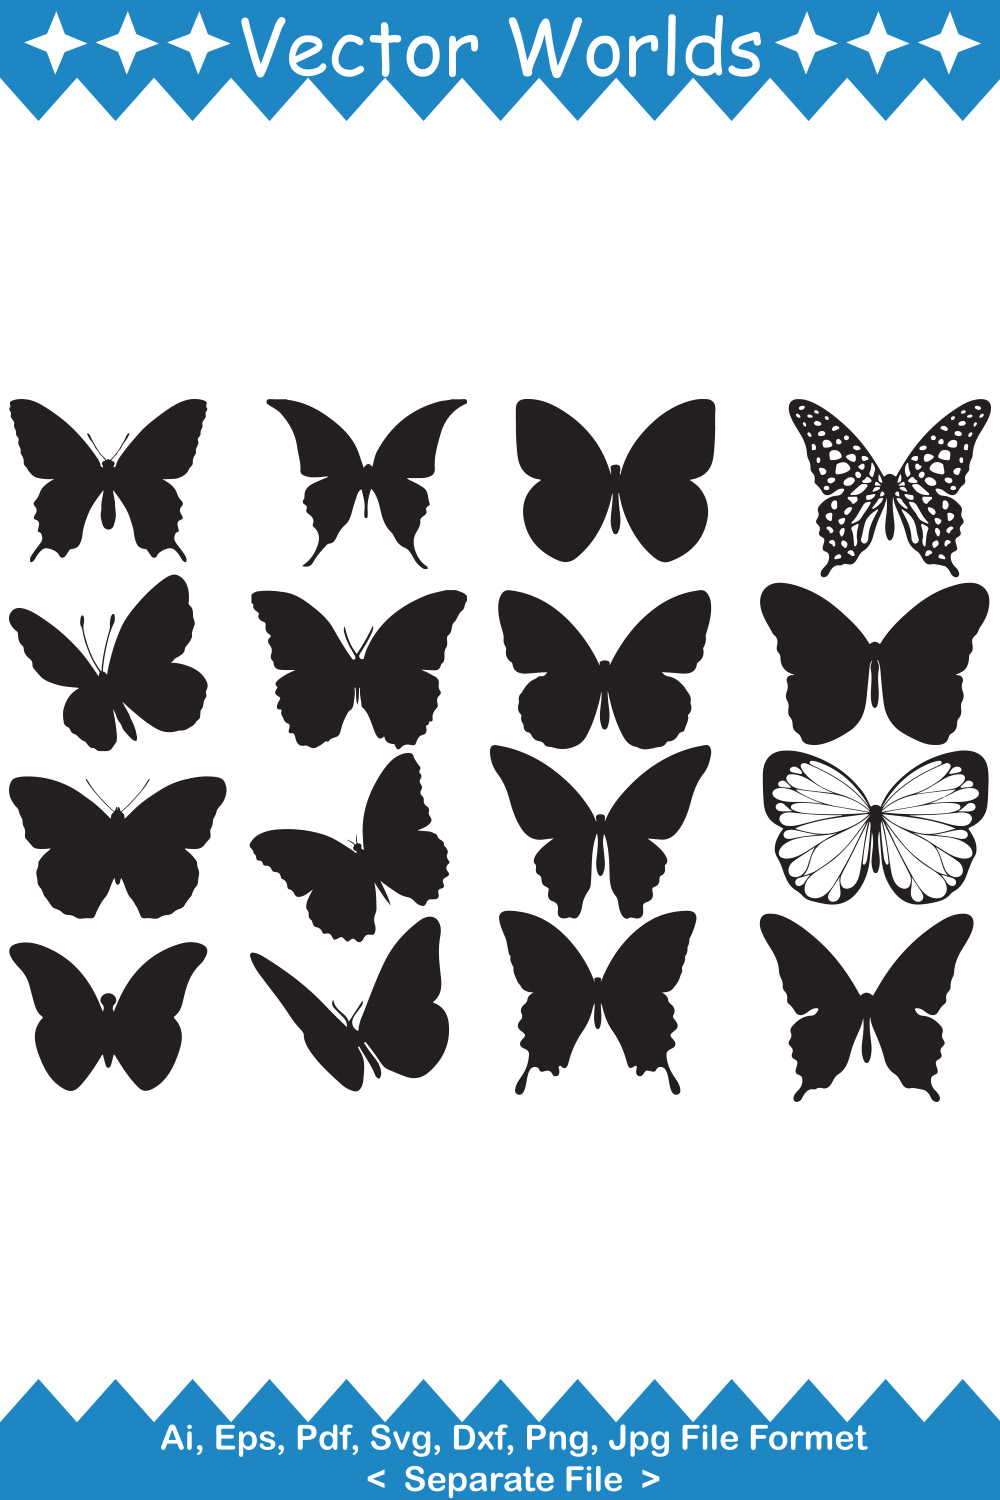 Set of black and white butterflies on a white background.